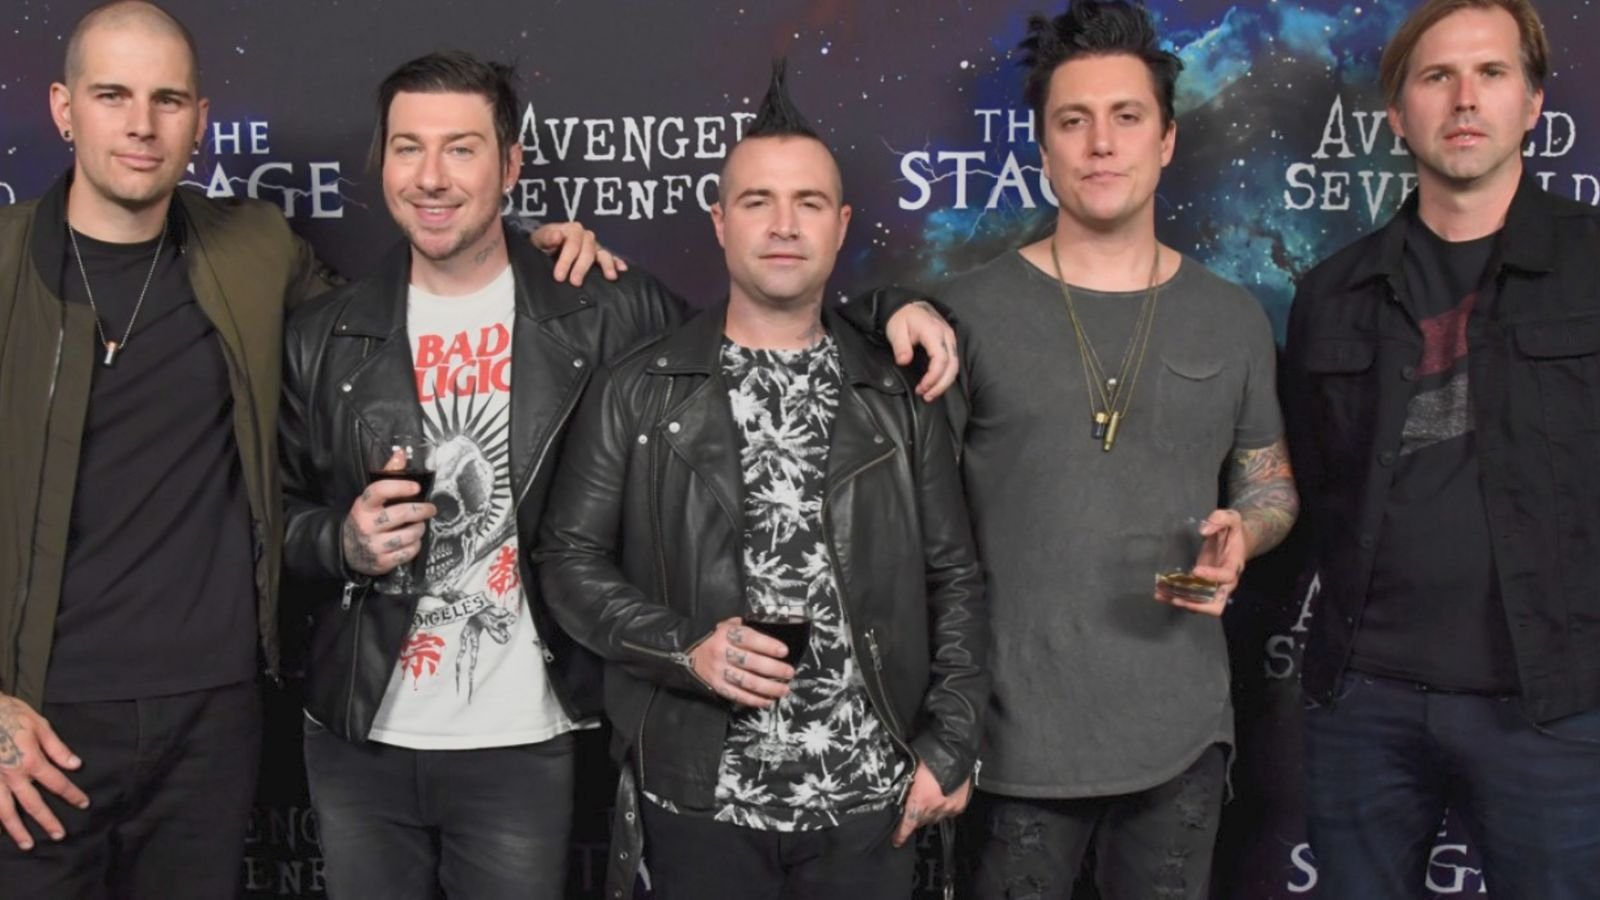 <p><span>After being out of the spotlight for almost seven years, Avenged Sevenfold is back and stronger than ever. They're supporting their 2023 album </span><i><span>Life Is But A Dream</span></i><span>, a daring piece of work, on stages across the USA. But don't get anxious about it, because they won't play just the new material but hits from their back catalog as well. It's headbanging time!</span></p> <ul>   <li><span>Starts on March 23rd in Manchester, New Hampshire</span></li>   <li><span>Ends on June 30th in Lisboa, Portugal</span></li>  </ul> <p><span>Full tour dates and tickets </span><a href="https://www.avengedsevenfold.com/tour"><span>here</span></a><span>.</span></p>